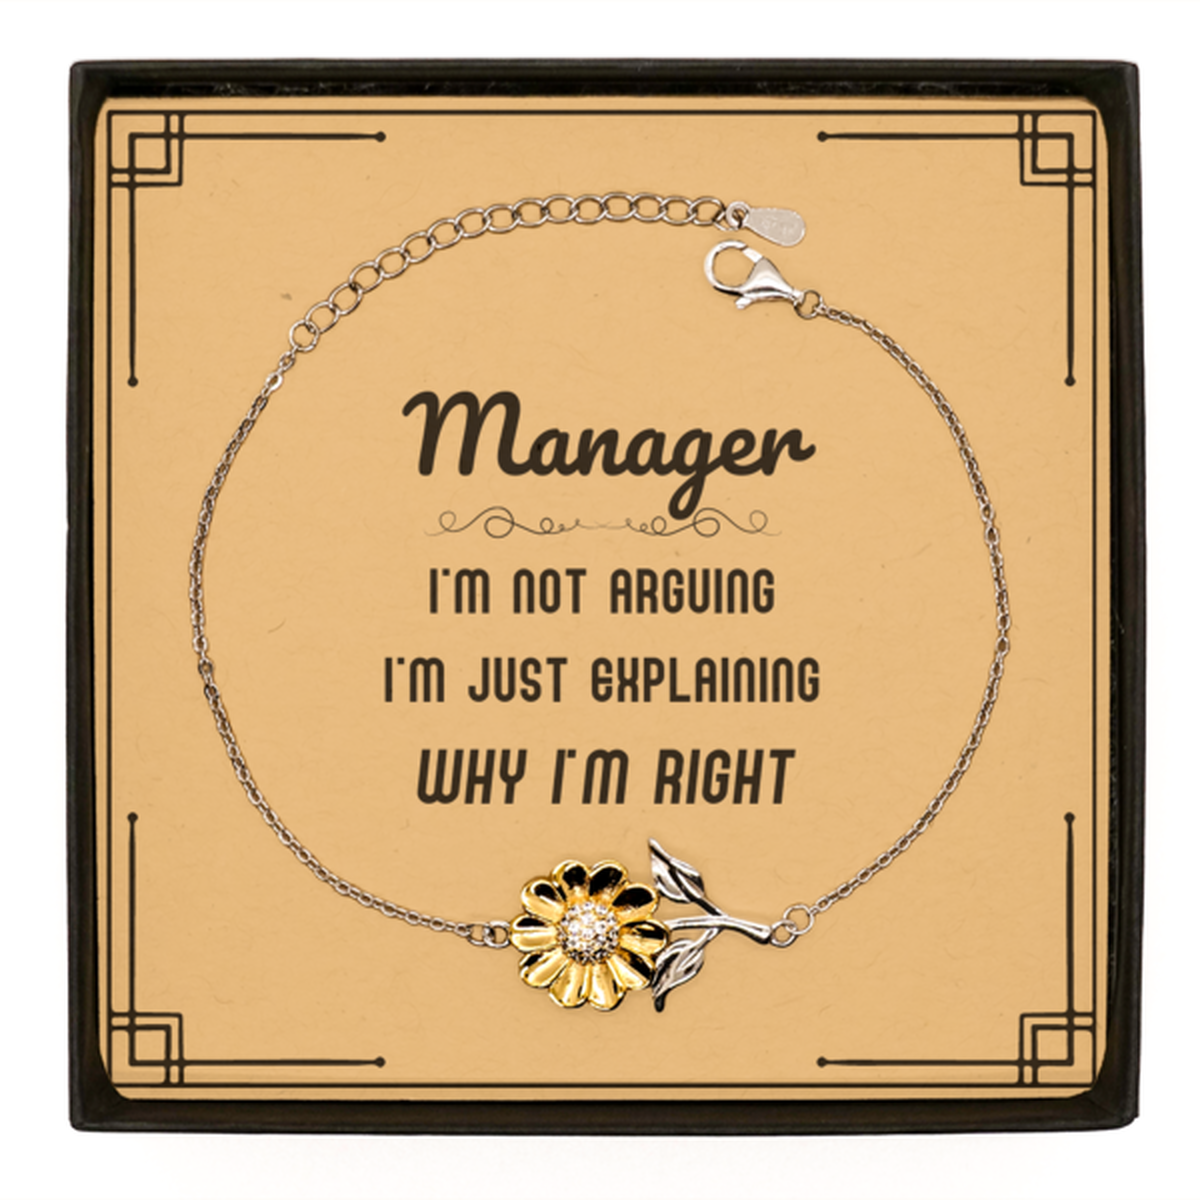 Manager I'm not Arguing. I'm Just Explaining Why I'm RIGHT Sunflower Bracelet, Funny Saying Quote Manager Gifts For Manager Message Card Graduation Birthday Christmas Gifts for Men Women Coworker